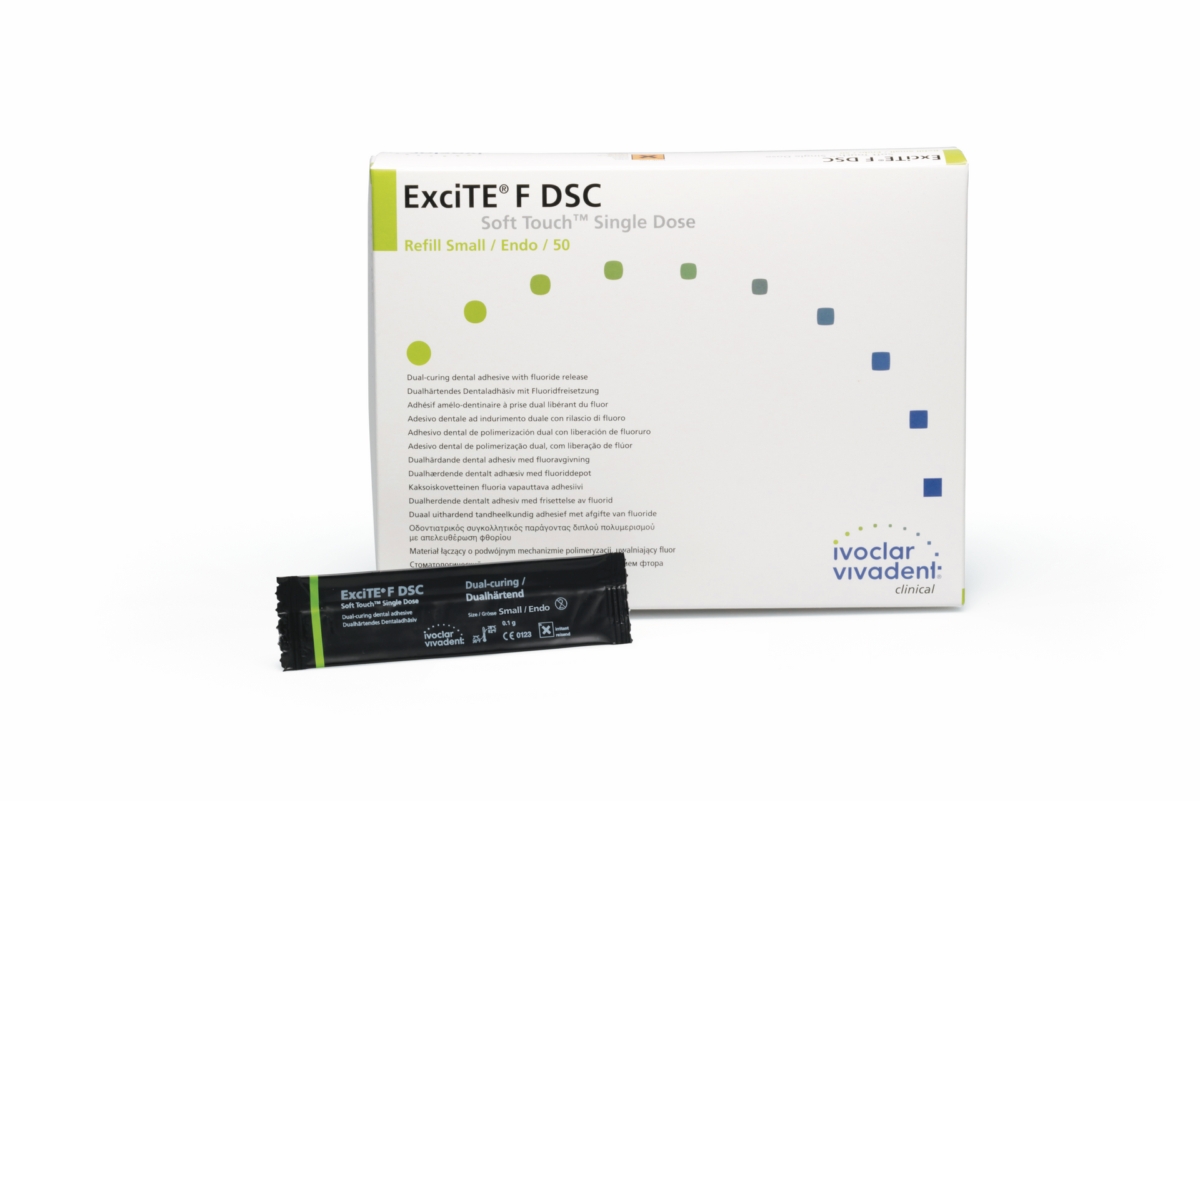 EXCITE F DSC SING/DOSE SMALL 50x0,1GR